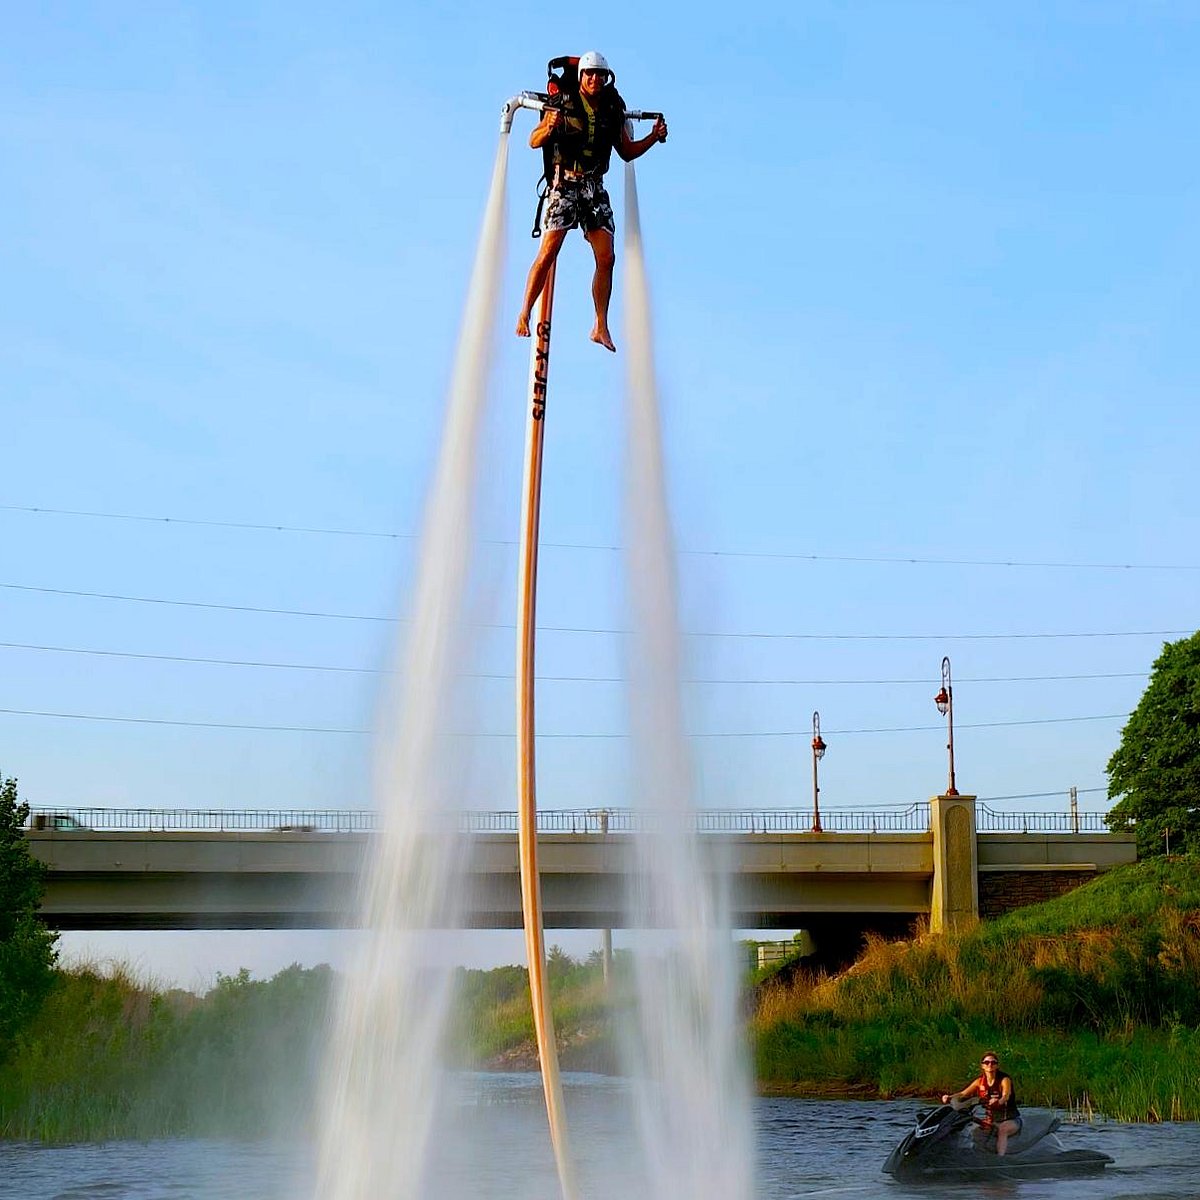 Fly out of the water with Jetpack Midwest rentals – Twin Cities